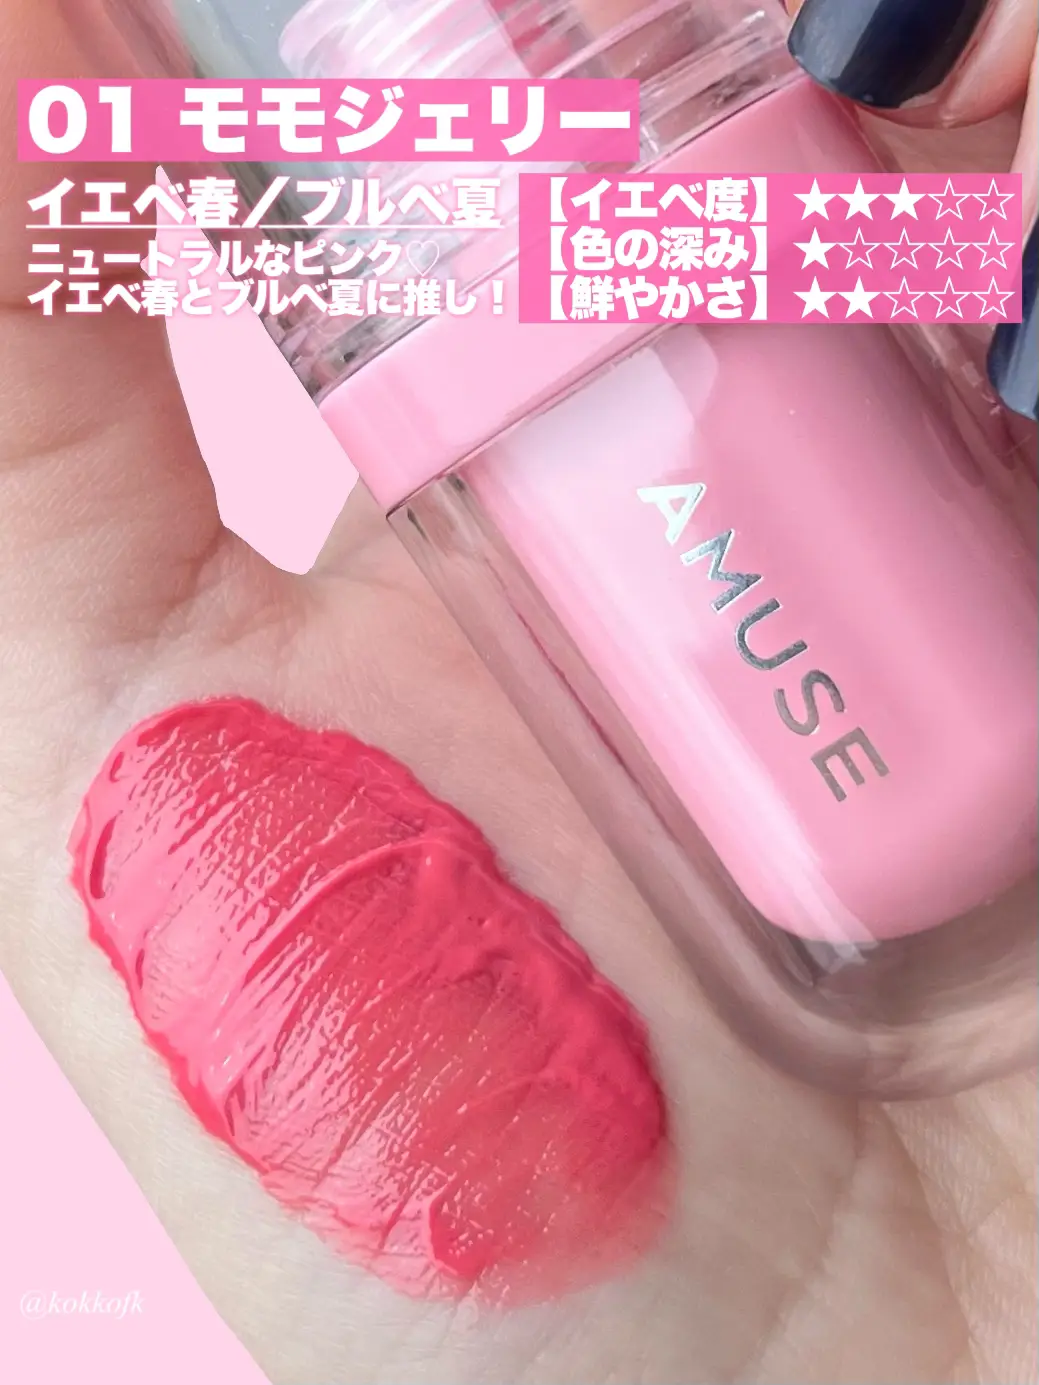 AMUSE New Gel Tint 💓 / | Gallery posted by 琴音 | Lemon8